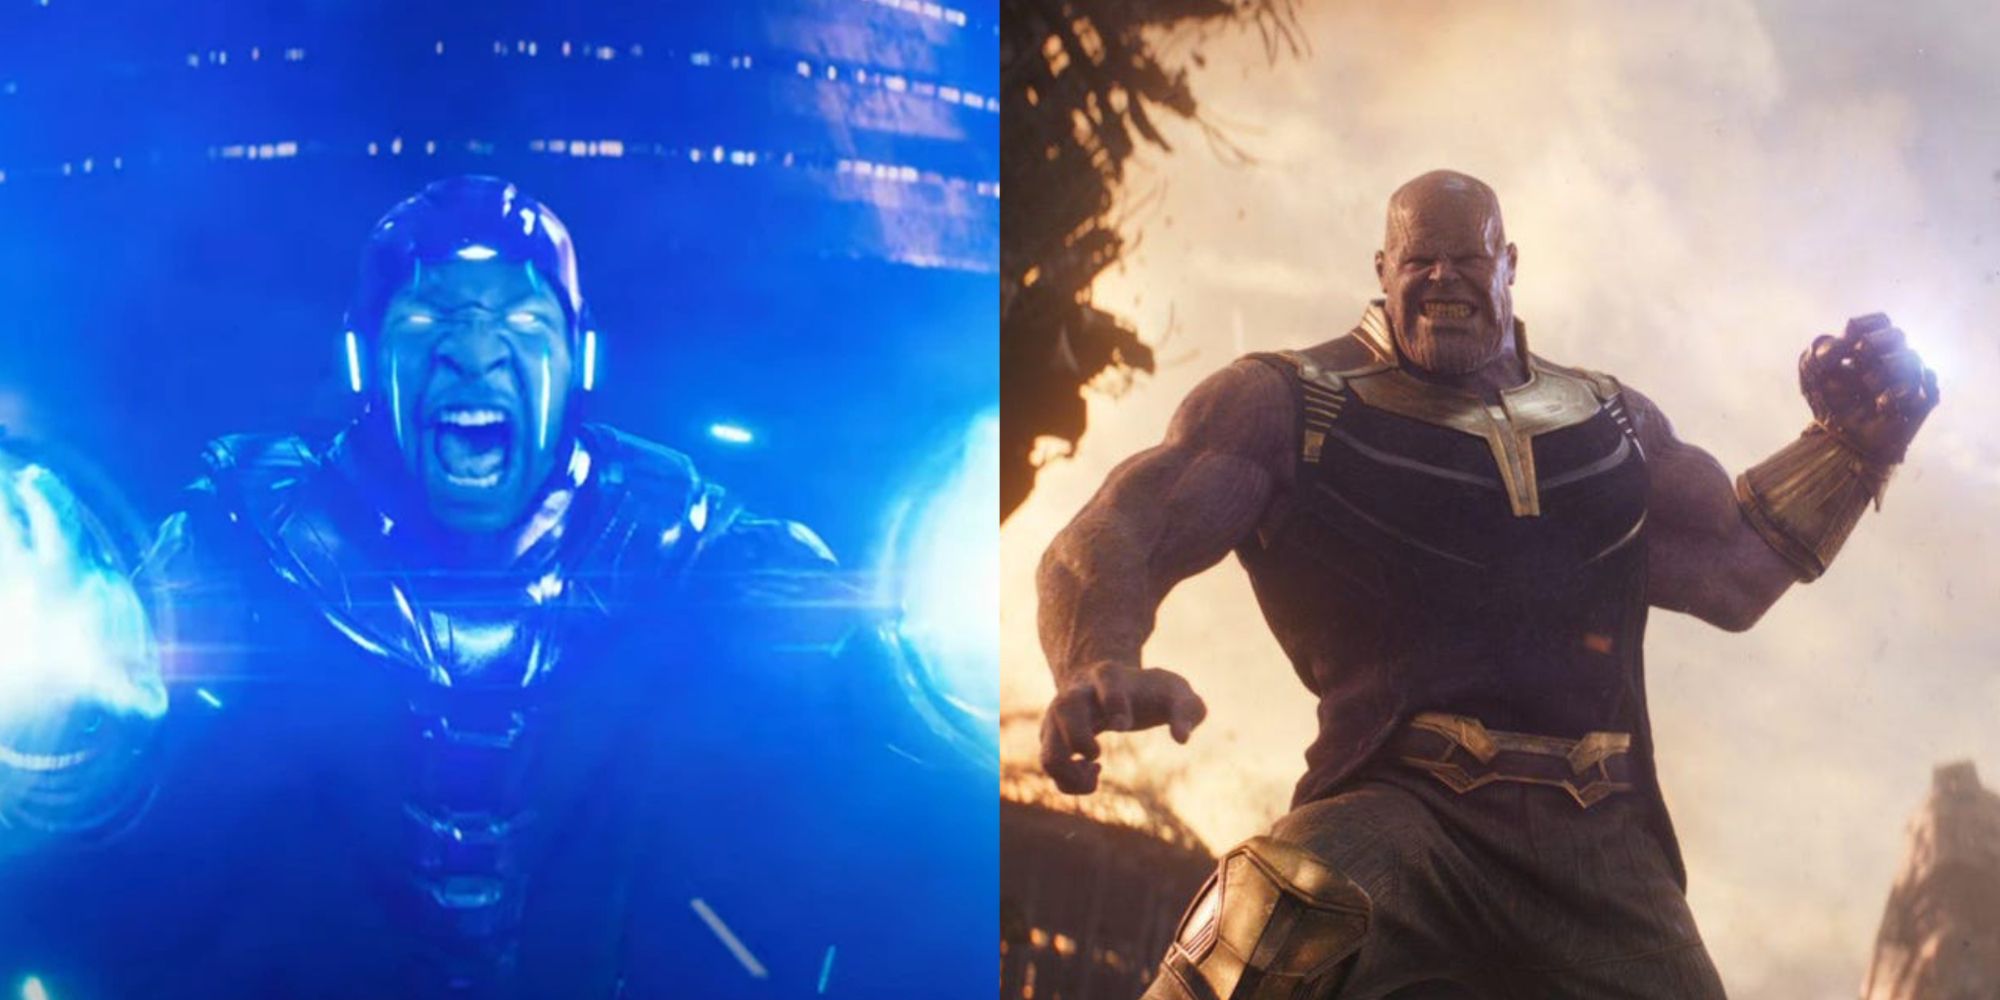 A split image of Kang attacking in Ant-Man and the Wasp Quantumania and Thanos attacking Avengers Infinity War